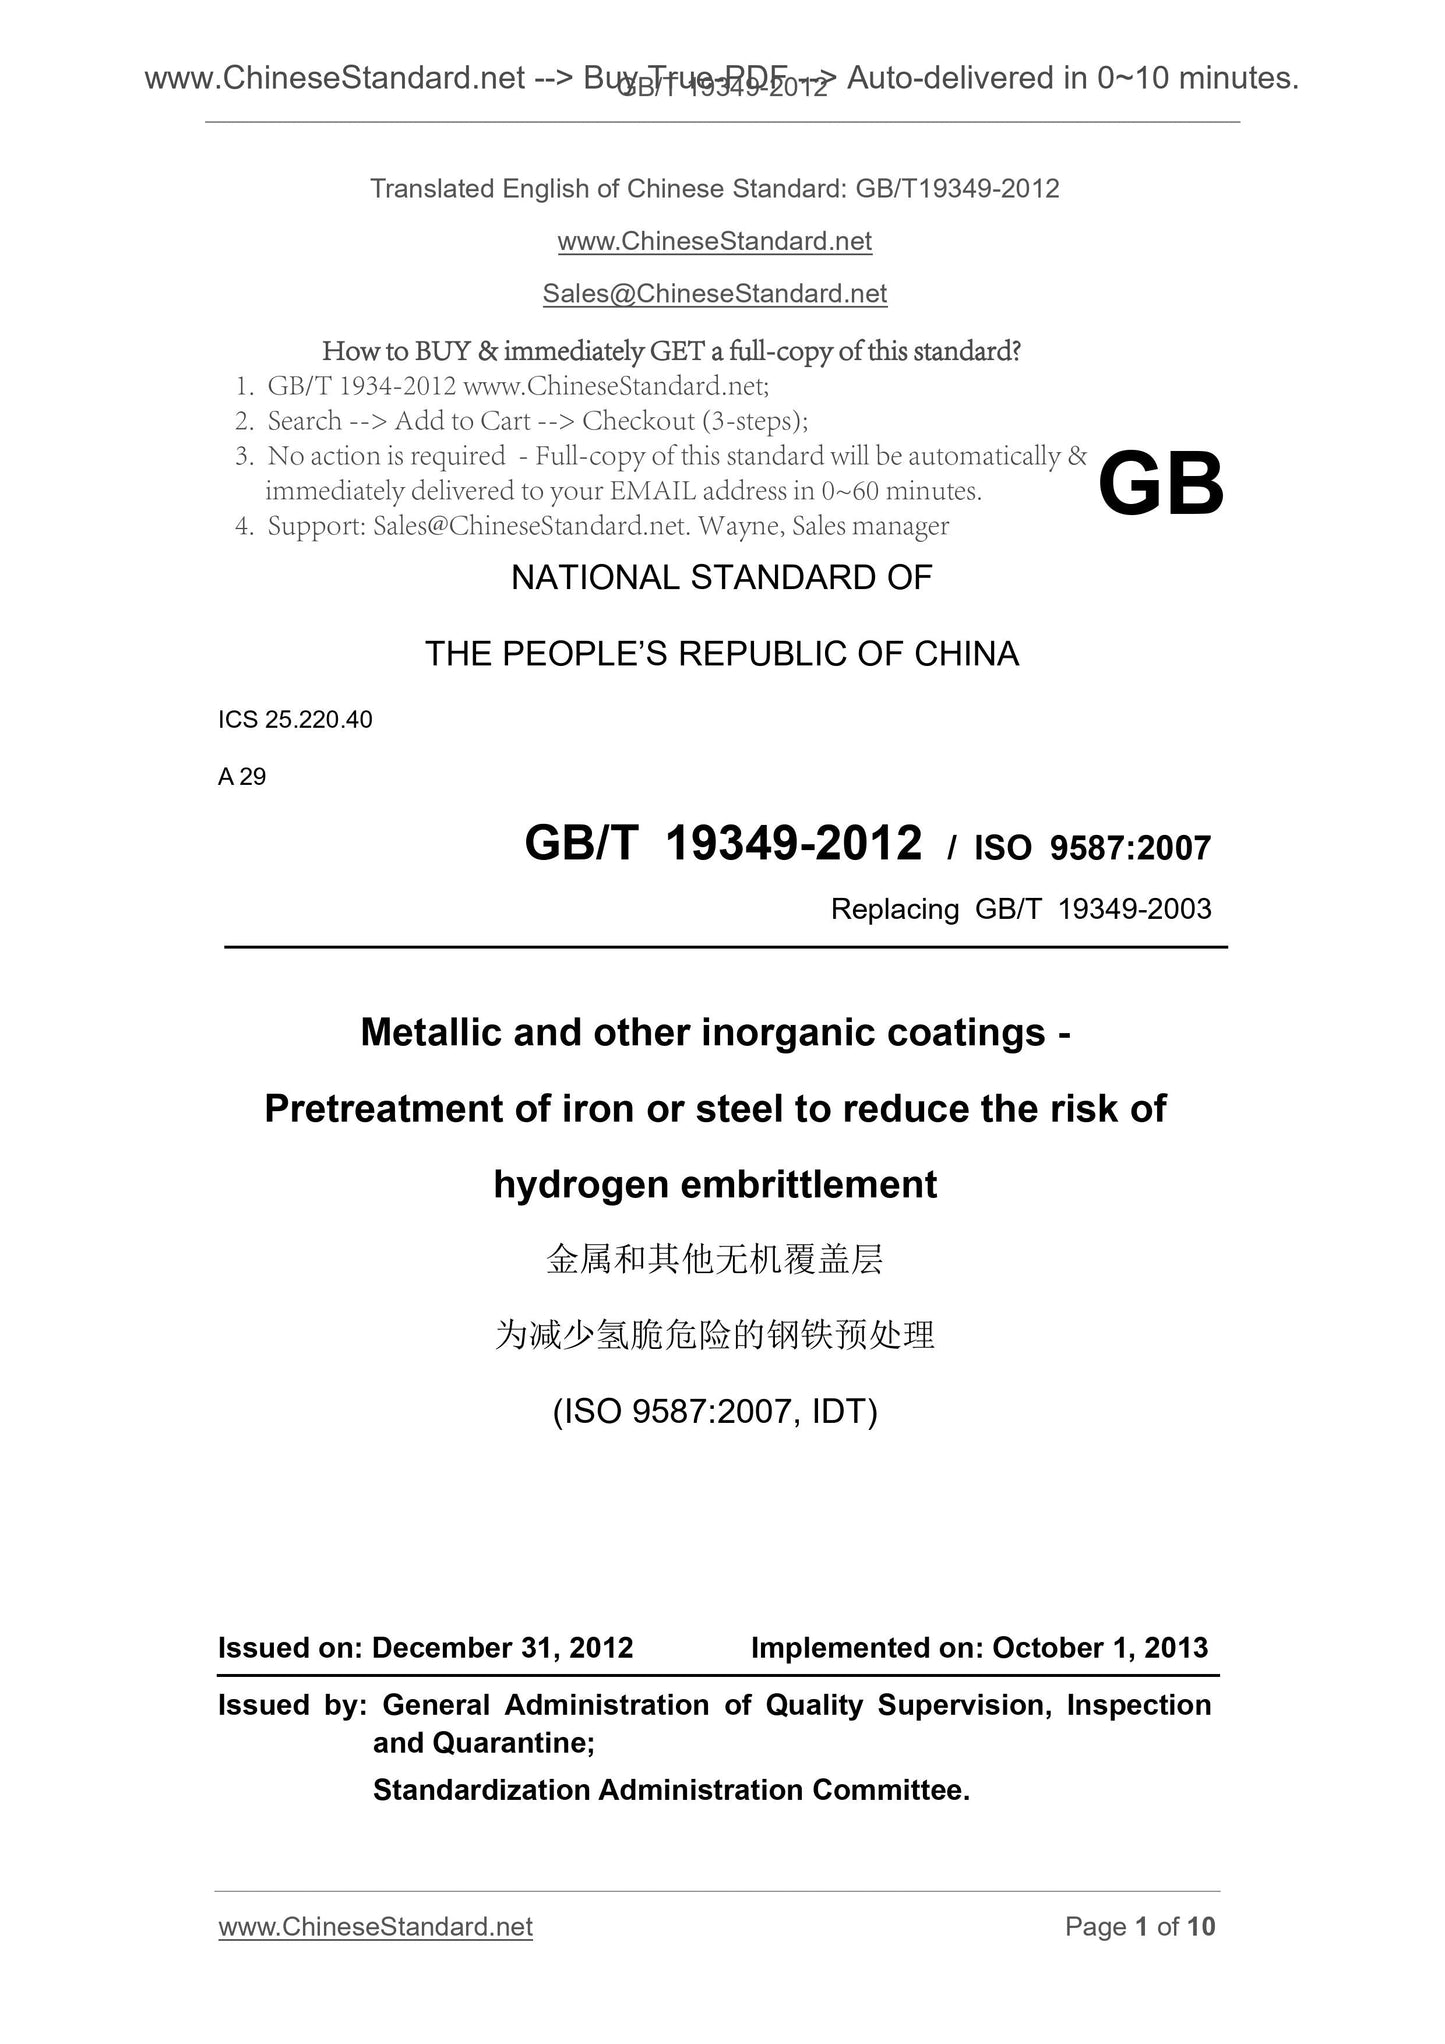 GB/T 19349-2012 Page 1